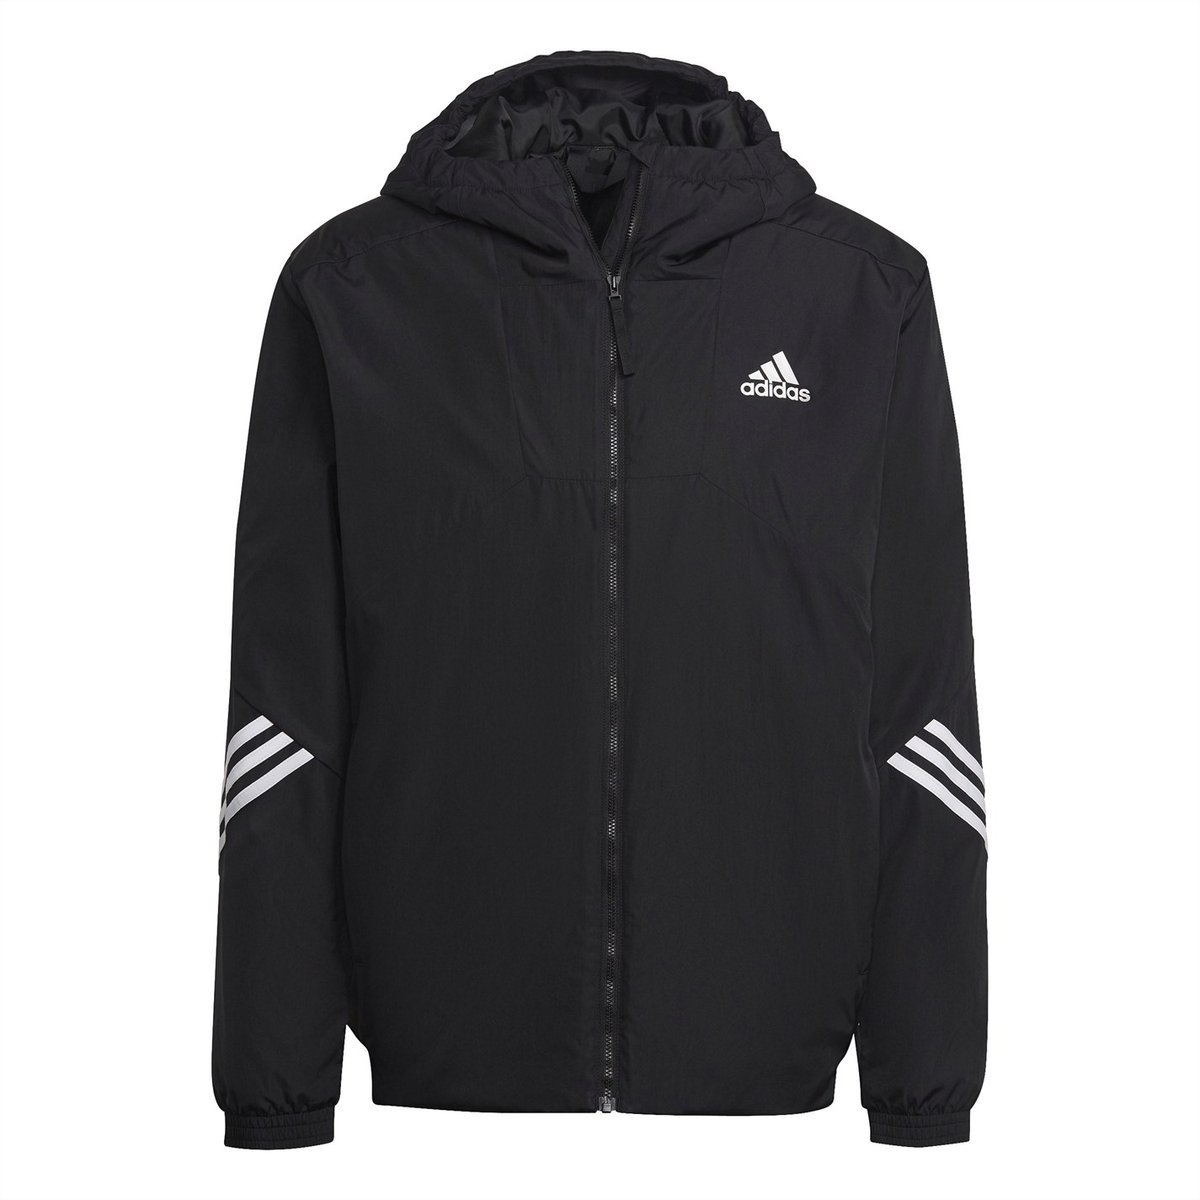 Adidas 4 Color Jacket at Rs 400/piece in New Delhi | ID: 17424015730